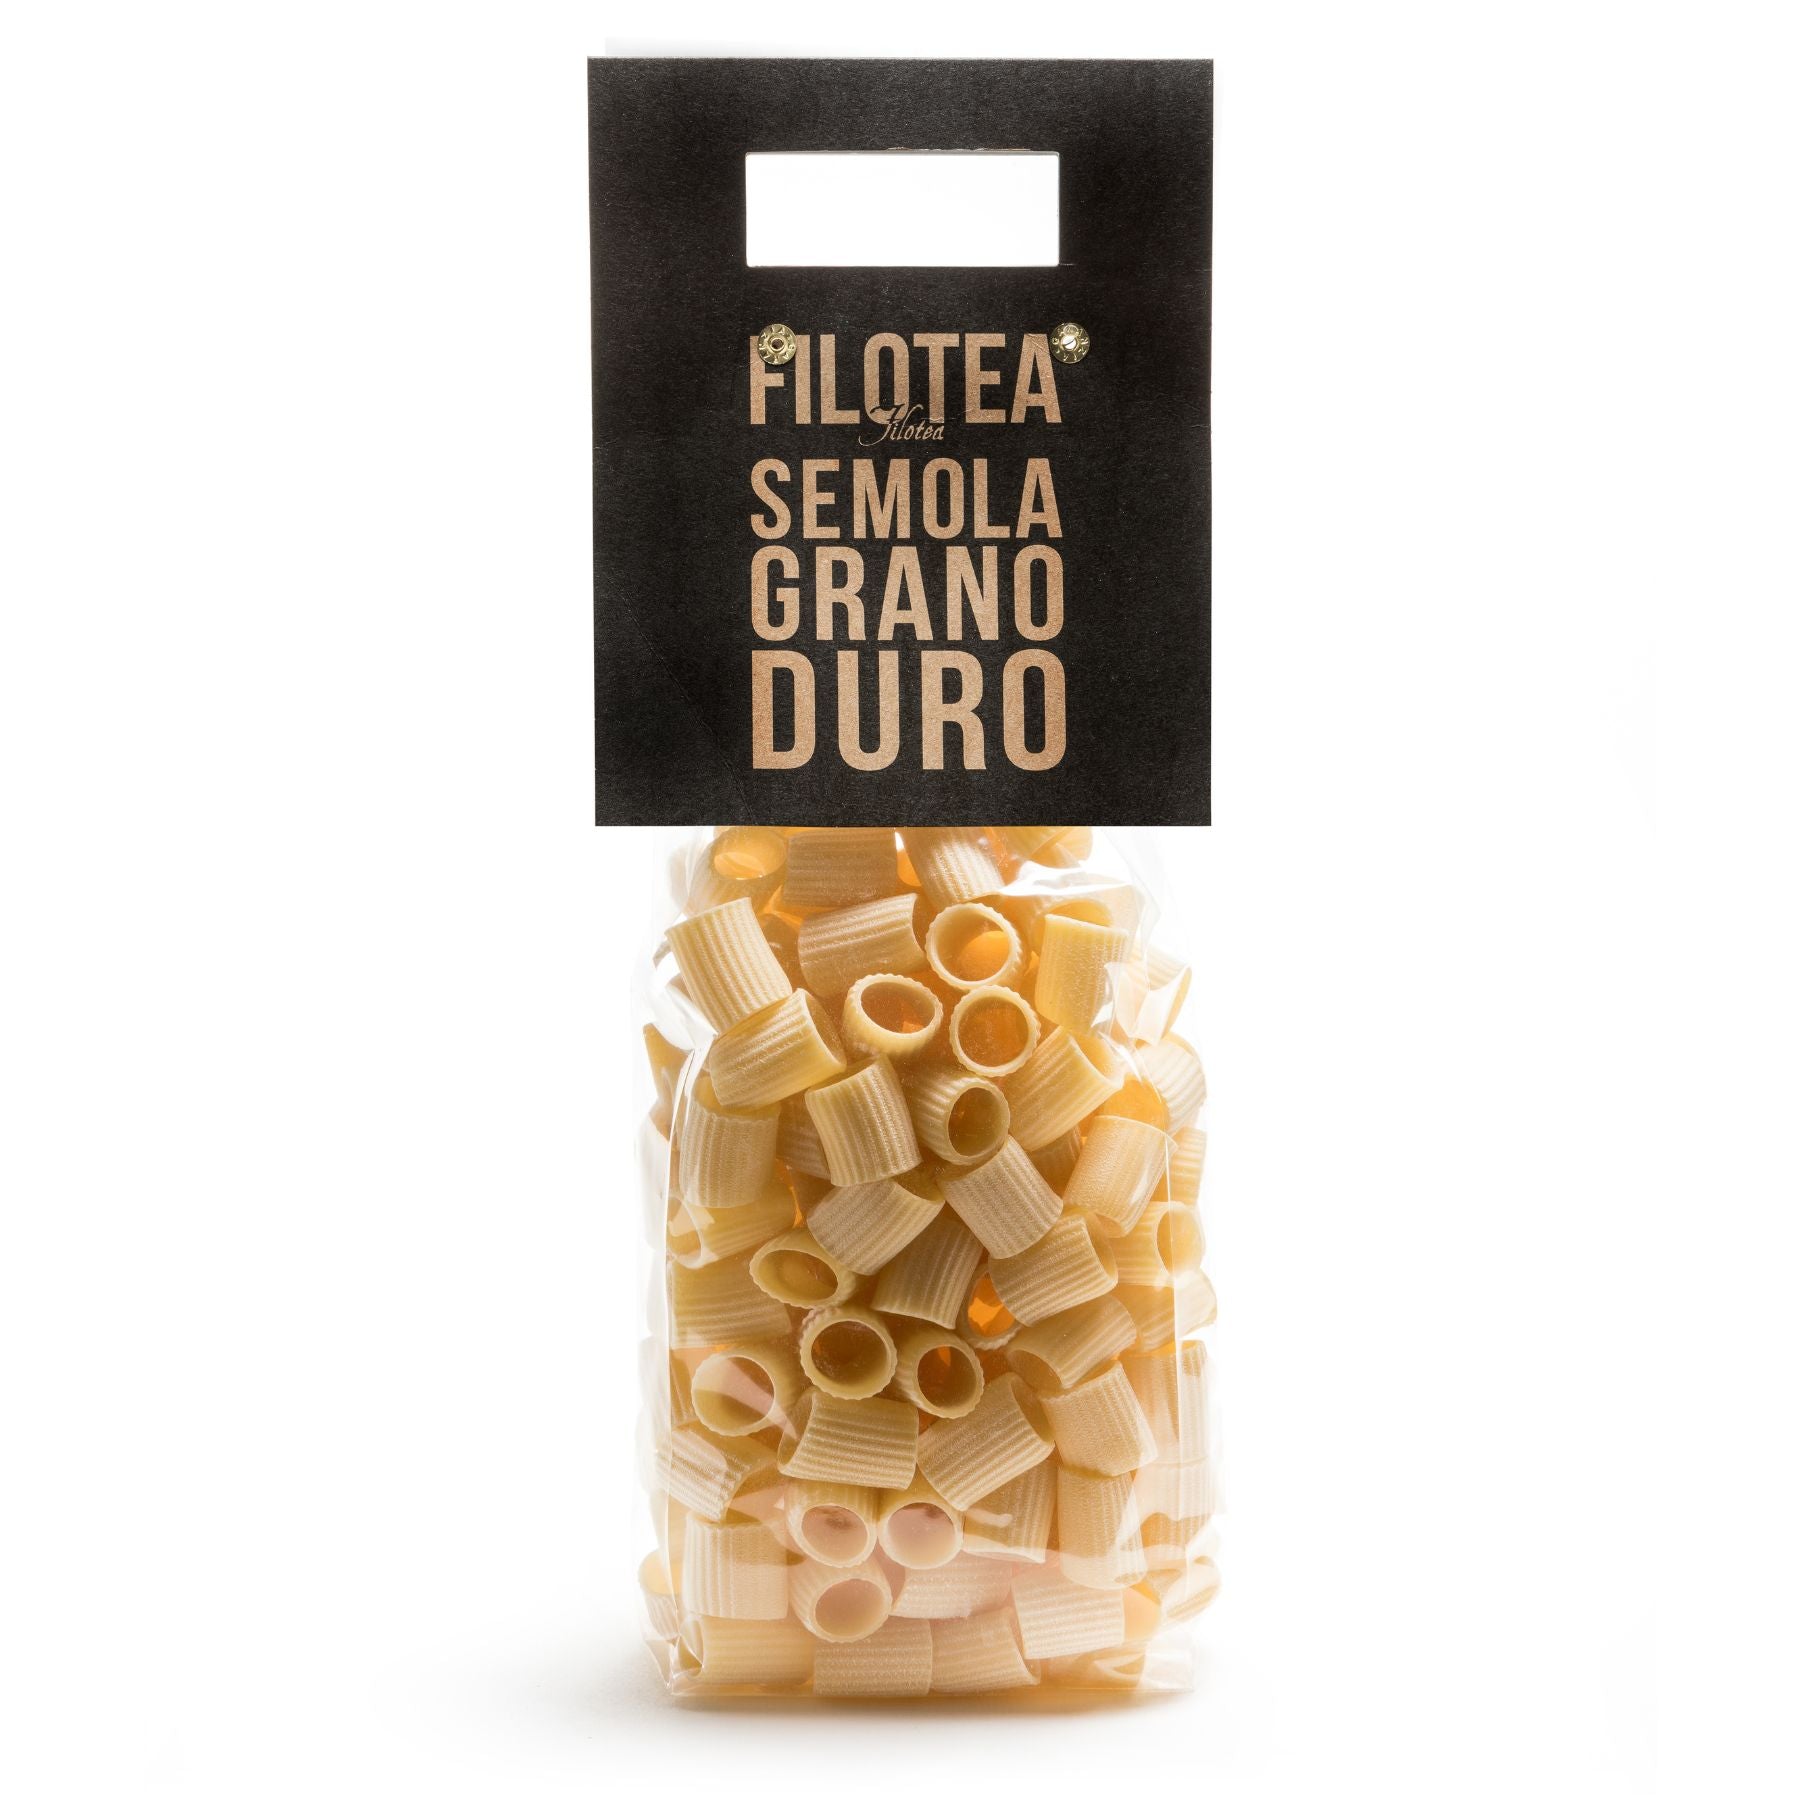 Filotea Mezze Maniche Durum Wheat Pasta 500g | Imported and distributed in the UK by Just Gourmet Foods